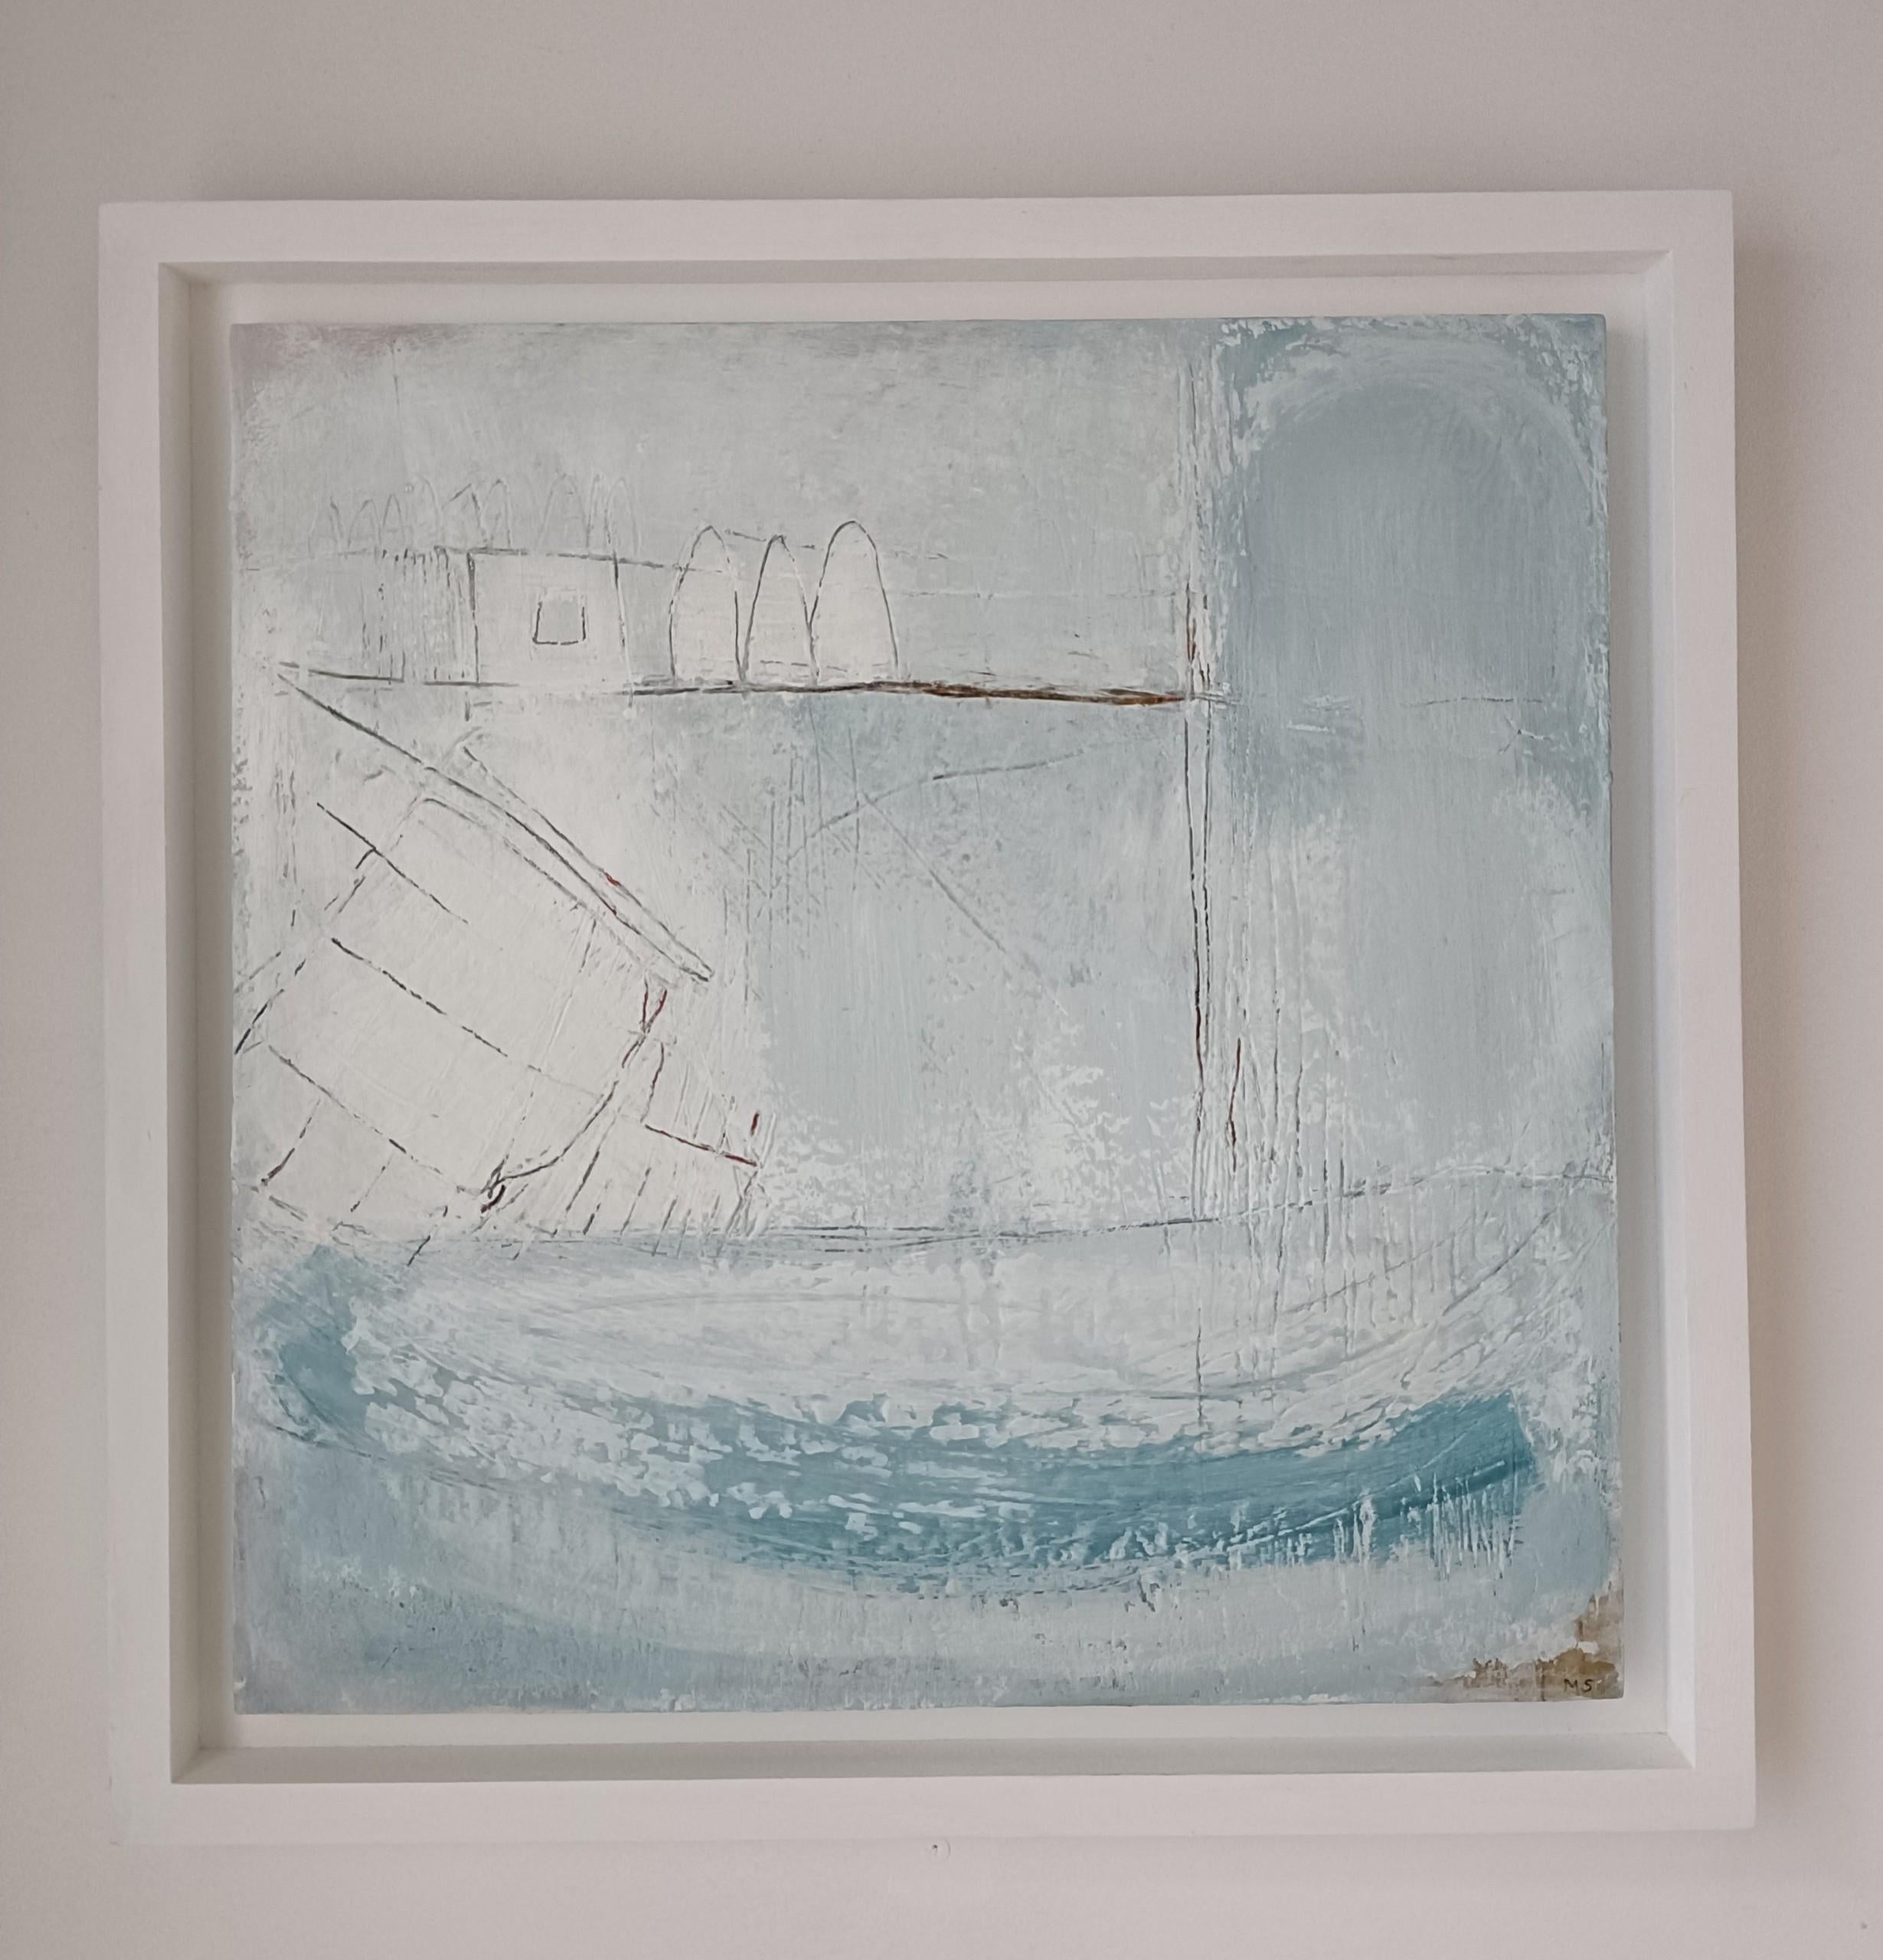 Meet Me by the Harbour [2022]
Please note that insitu images are purely an indication of how a piece may look

Meet Me by the Harbour is an original painting by Mary Scott. This is an abstract painting in a minimal palette of cool turquoise, white